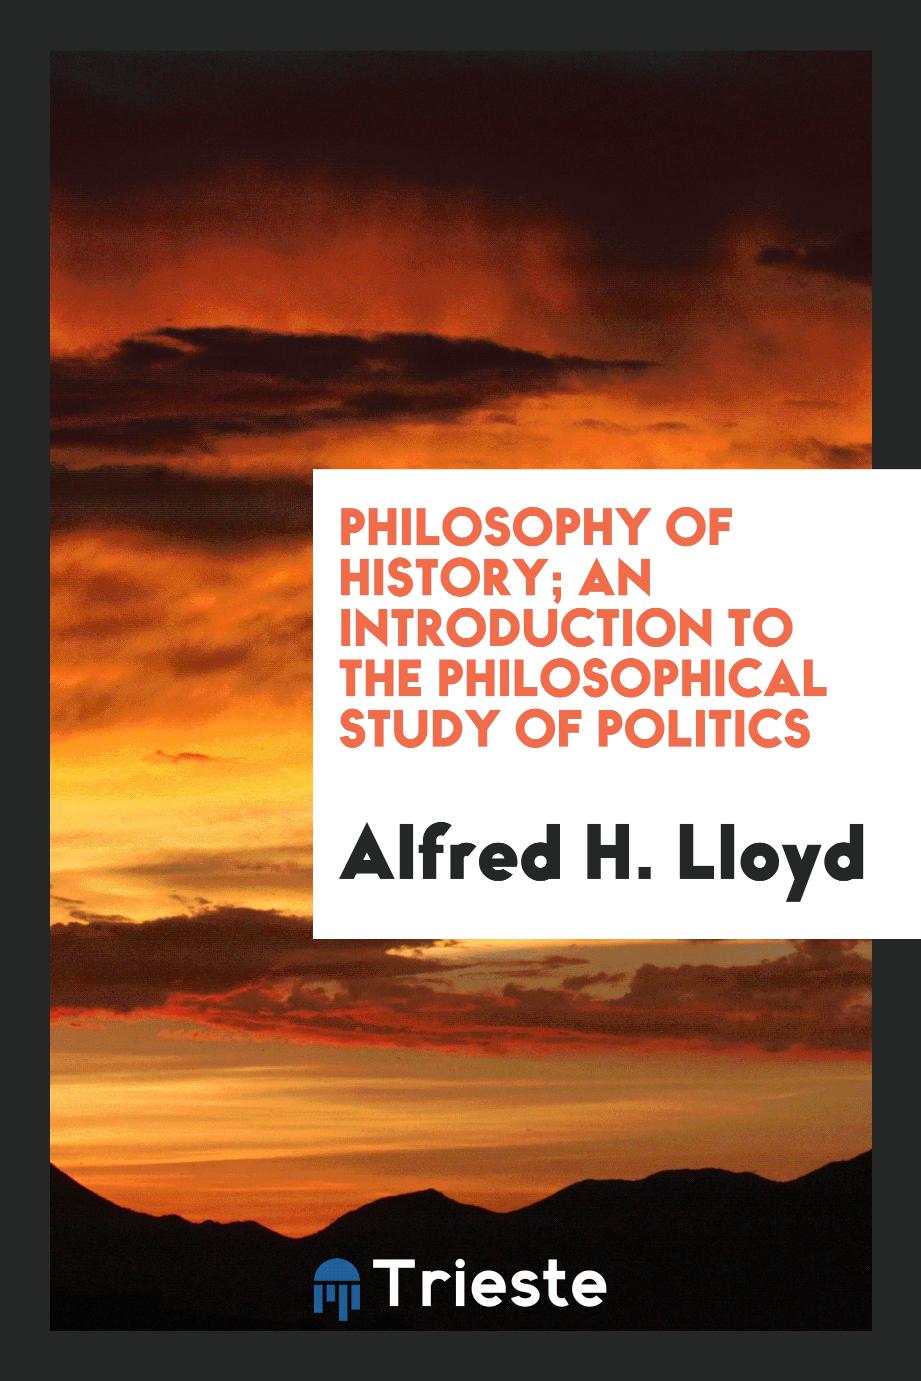 Philosophy of history; an introduction to the philosophical study of politics